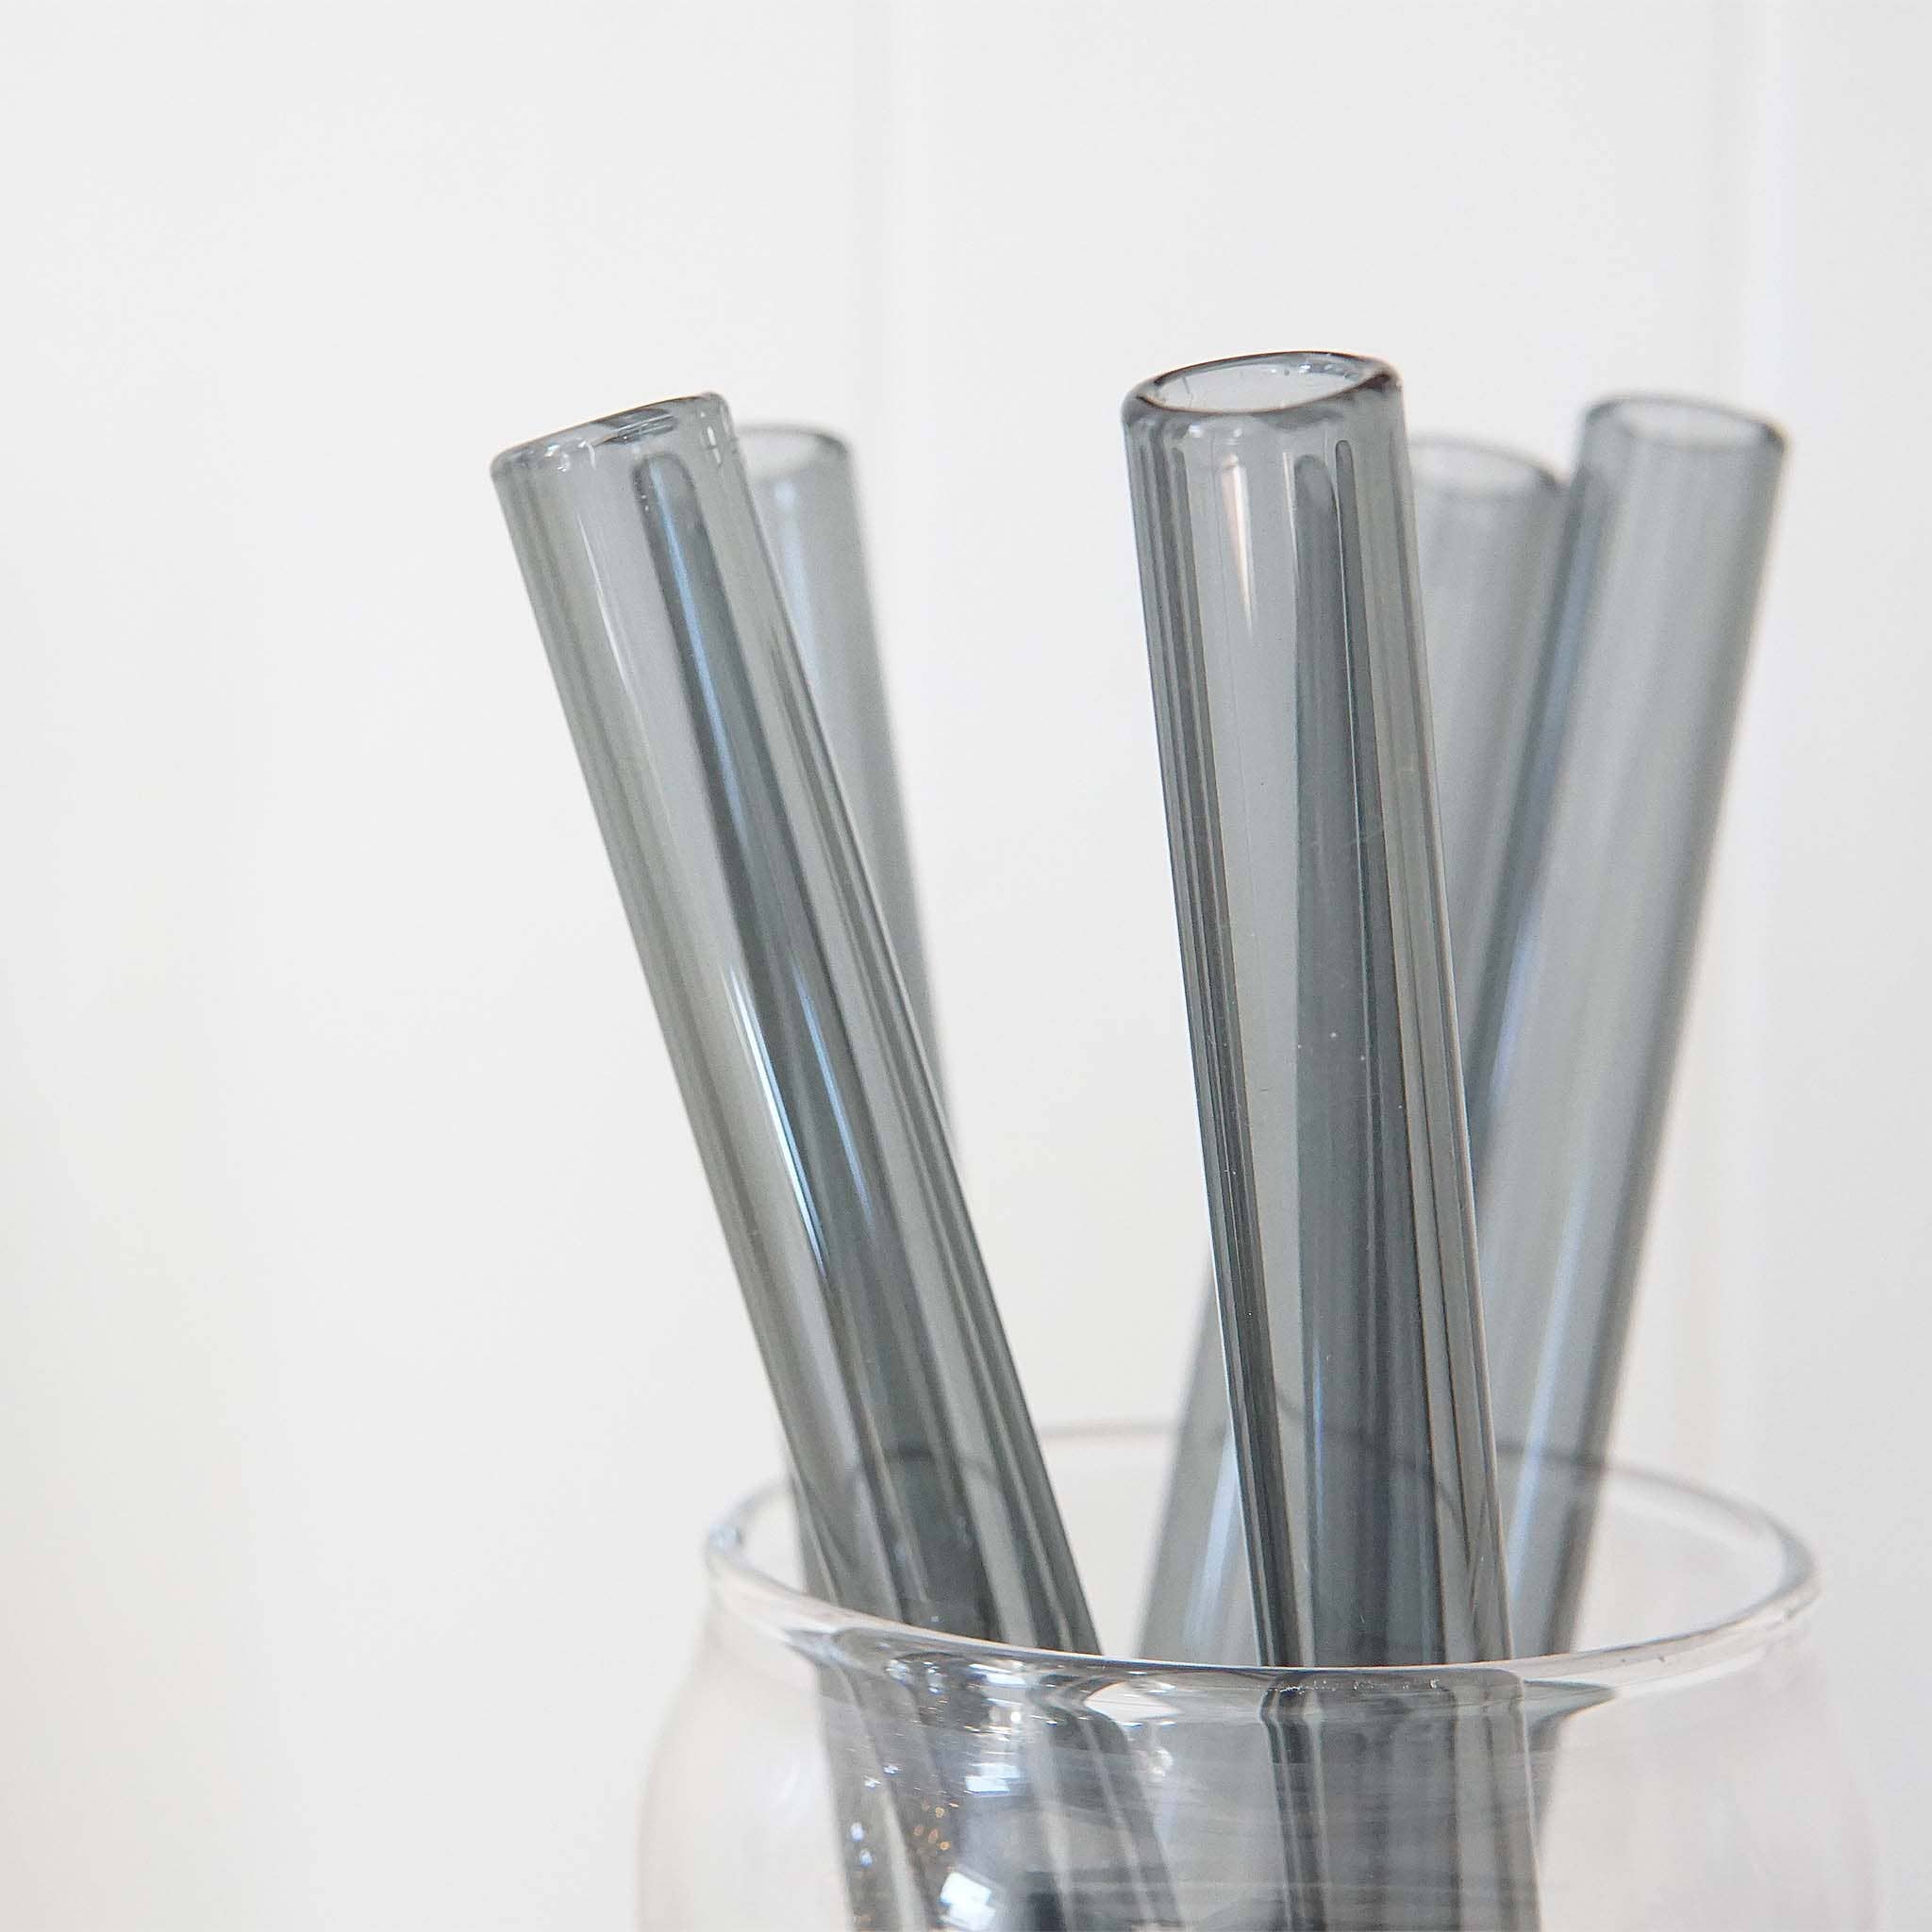 4 Pcs Straight Glass Straws Reusable Clear Straws 12mm Wide